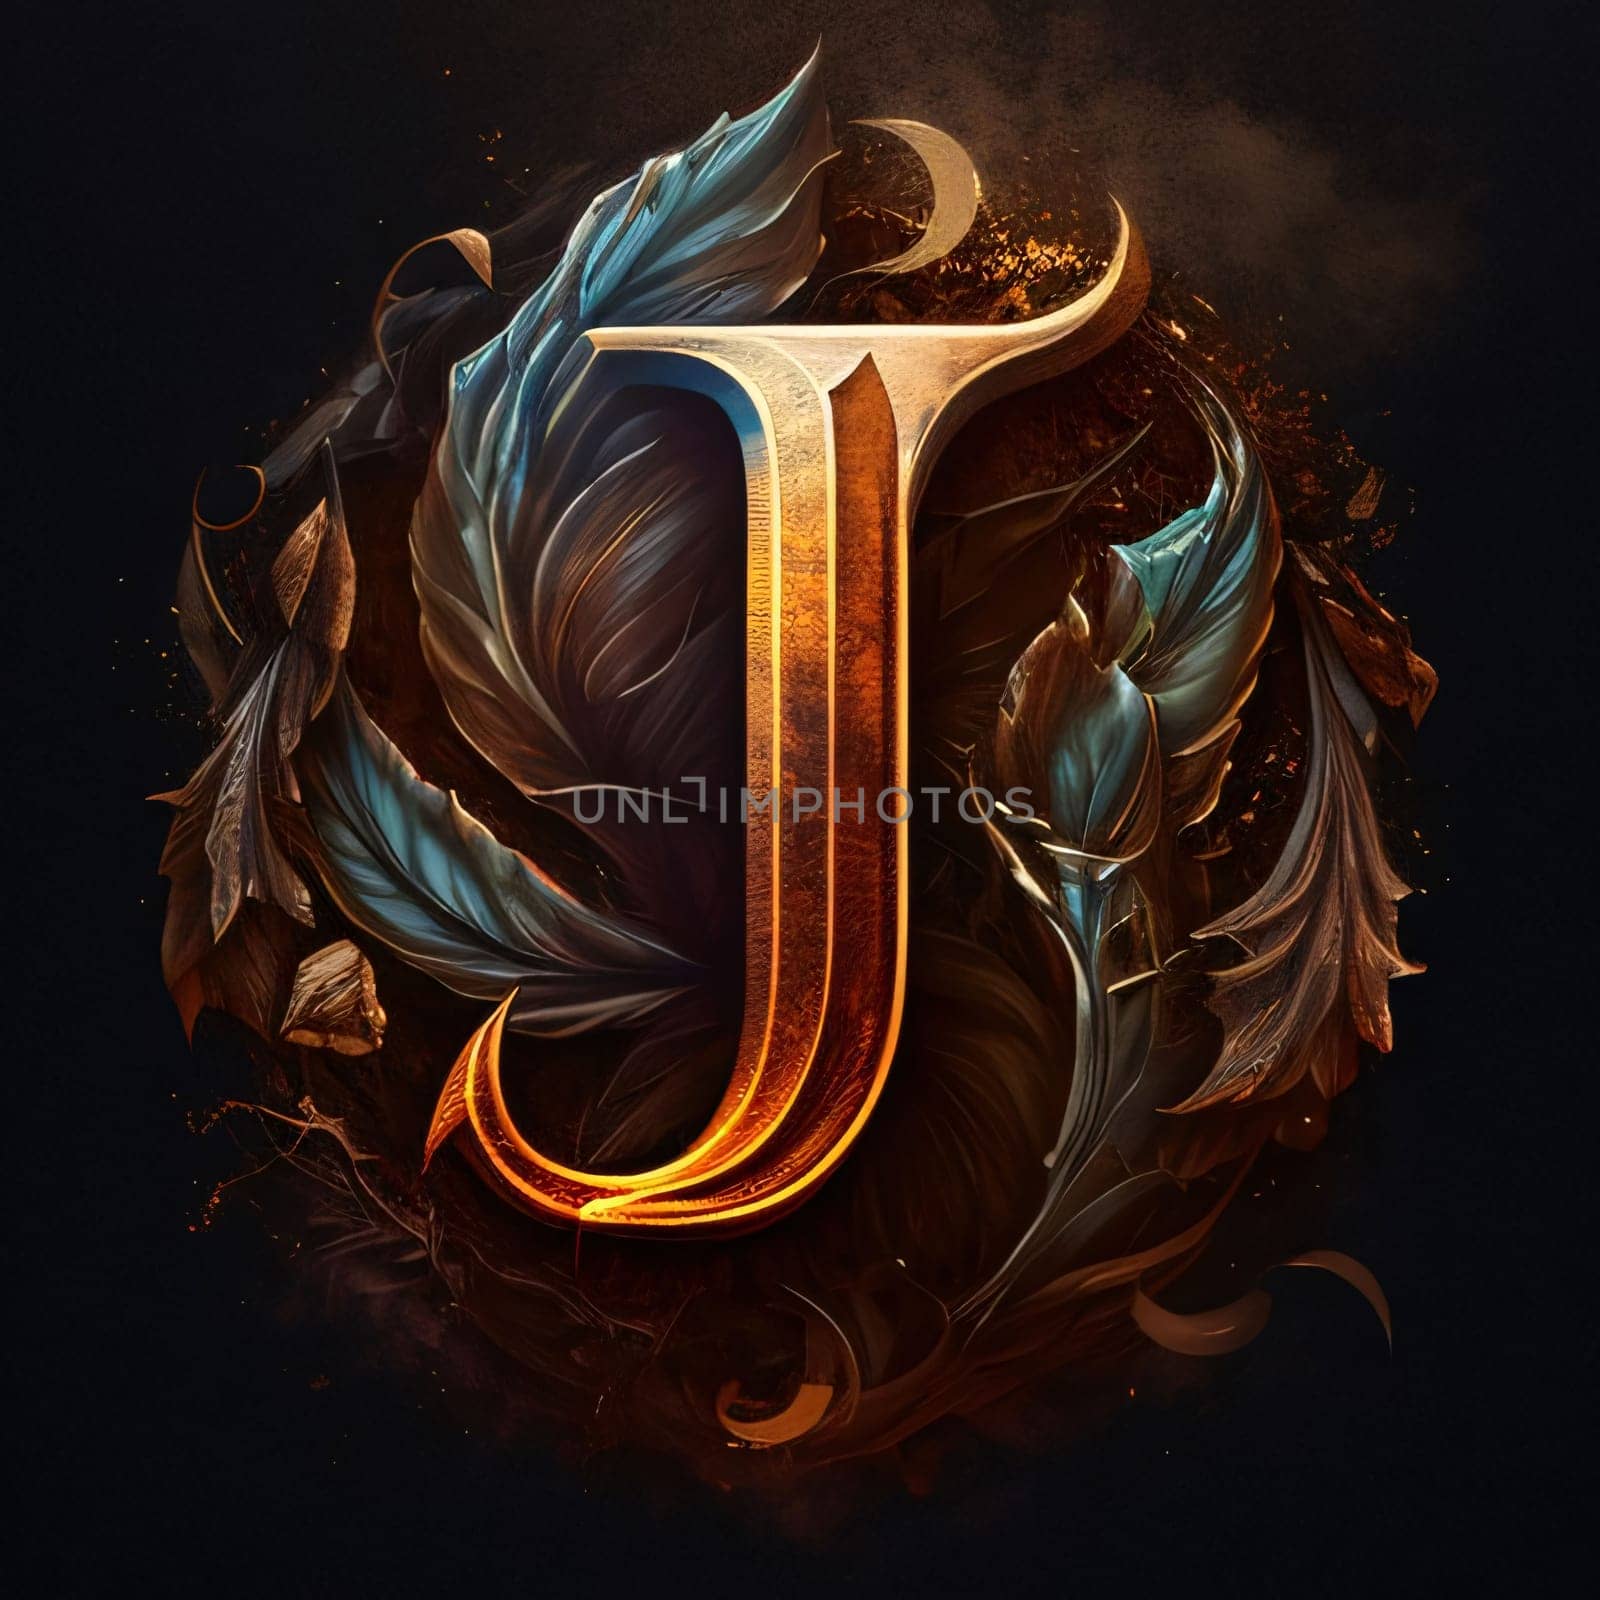 Graphic alphabet letters: Letter J with stylized feathers and flames on the black background.